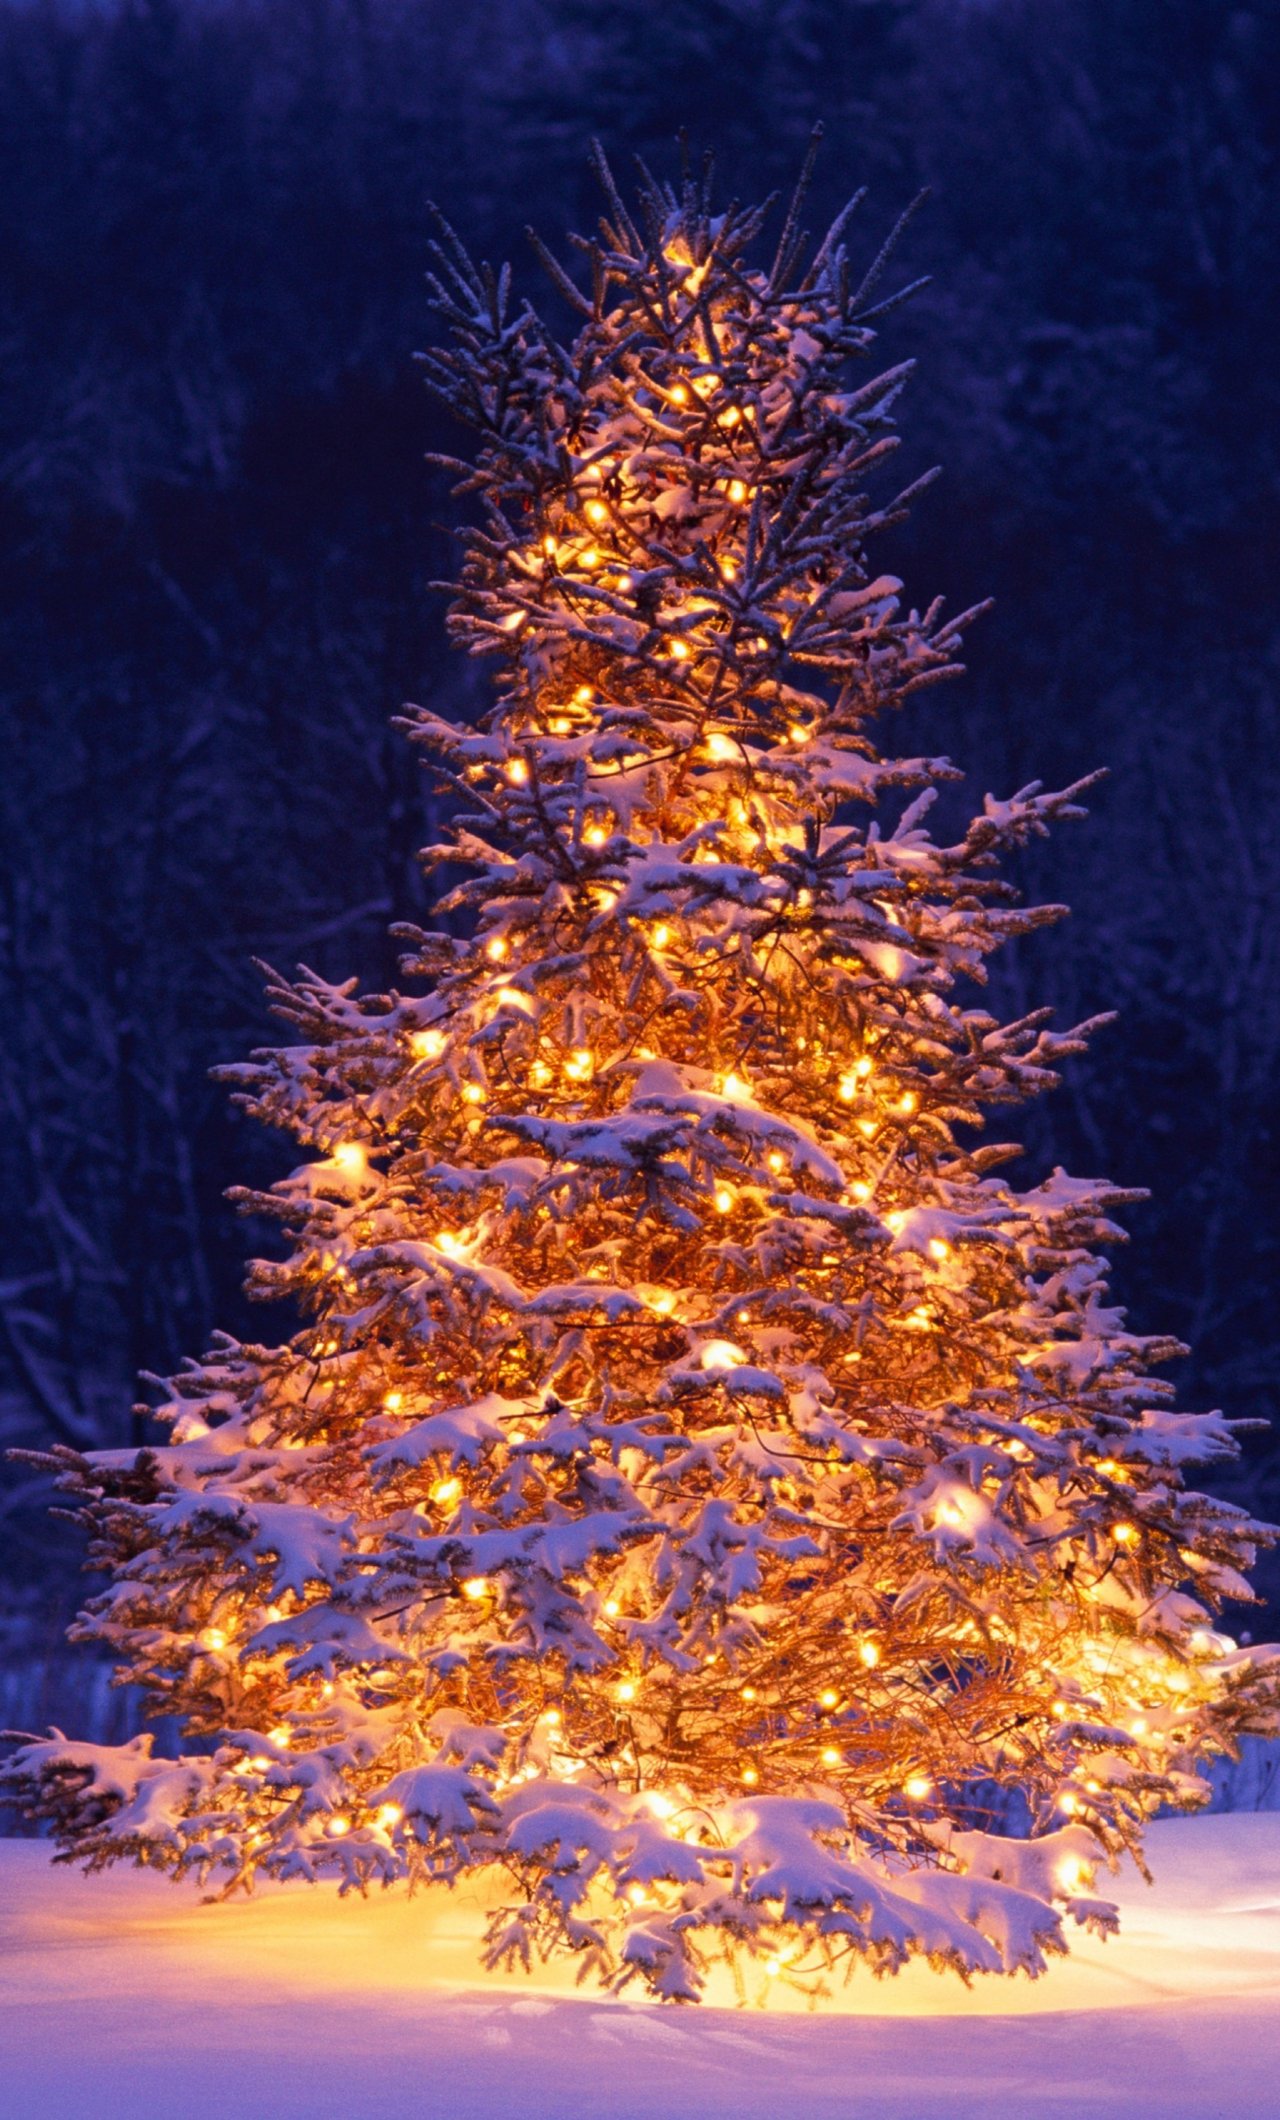 Download wallpaper 1280x2120 christmas tree, chairs, winter, christmas, holiday, iphone 6 plus, 1280x2120 HD background, 1460